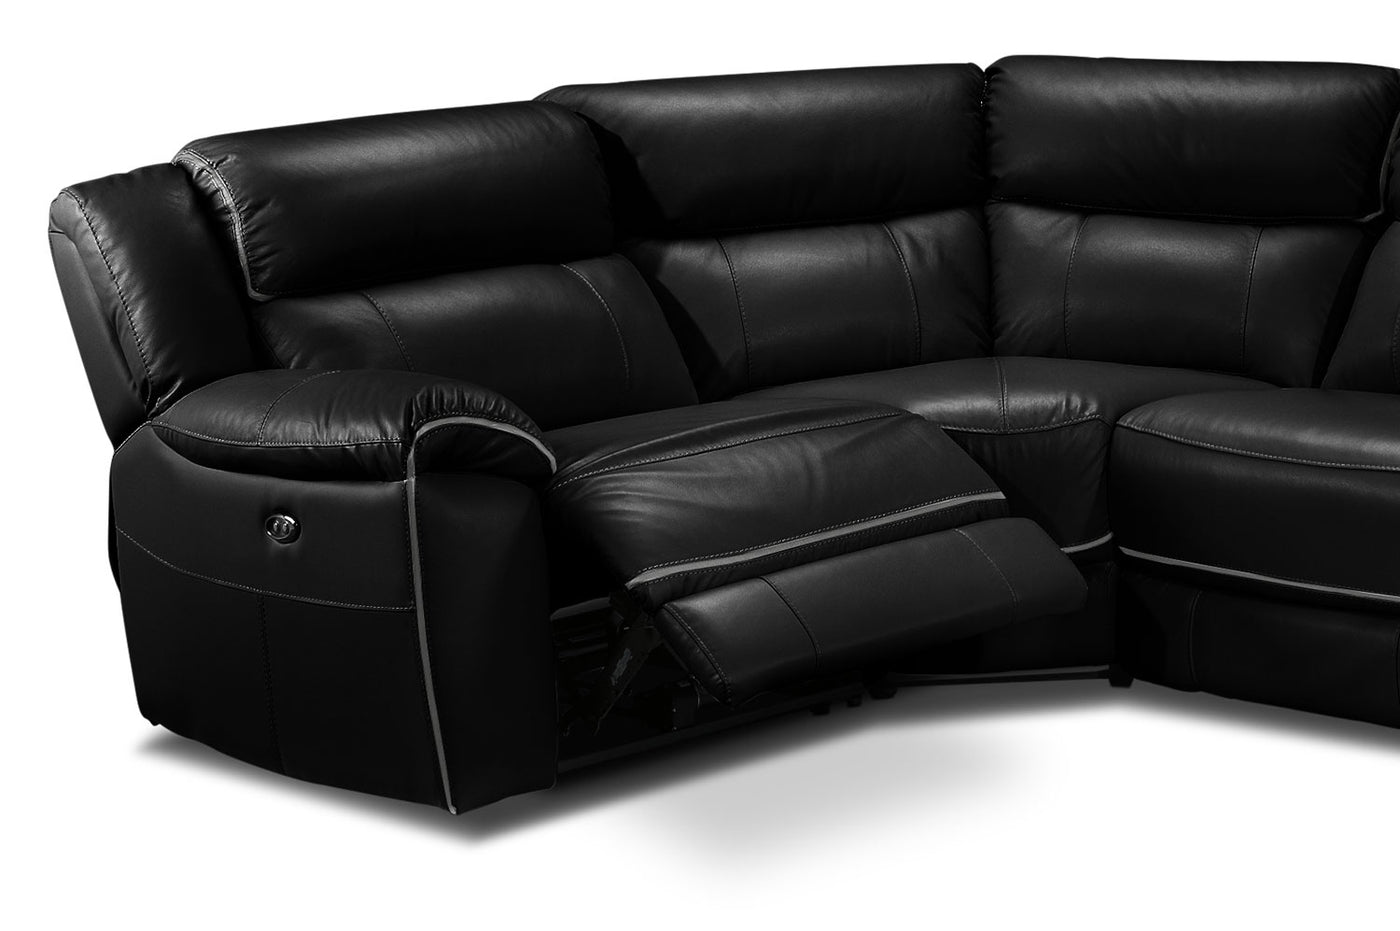 Holton Leather 5-Piece Sectional with Right-Facing Chaise - Black